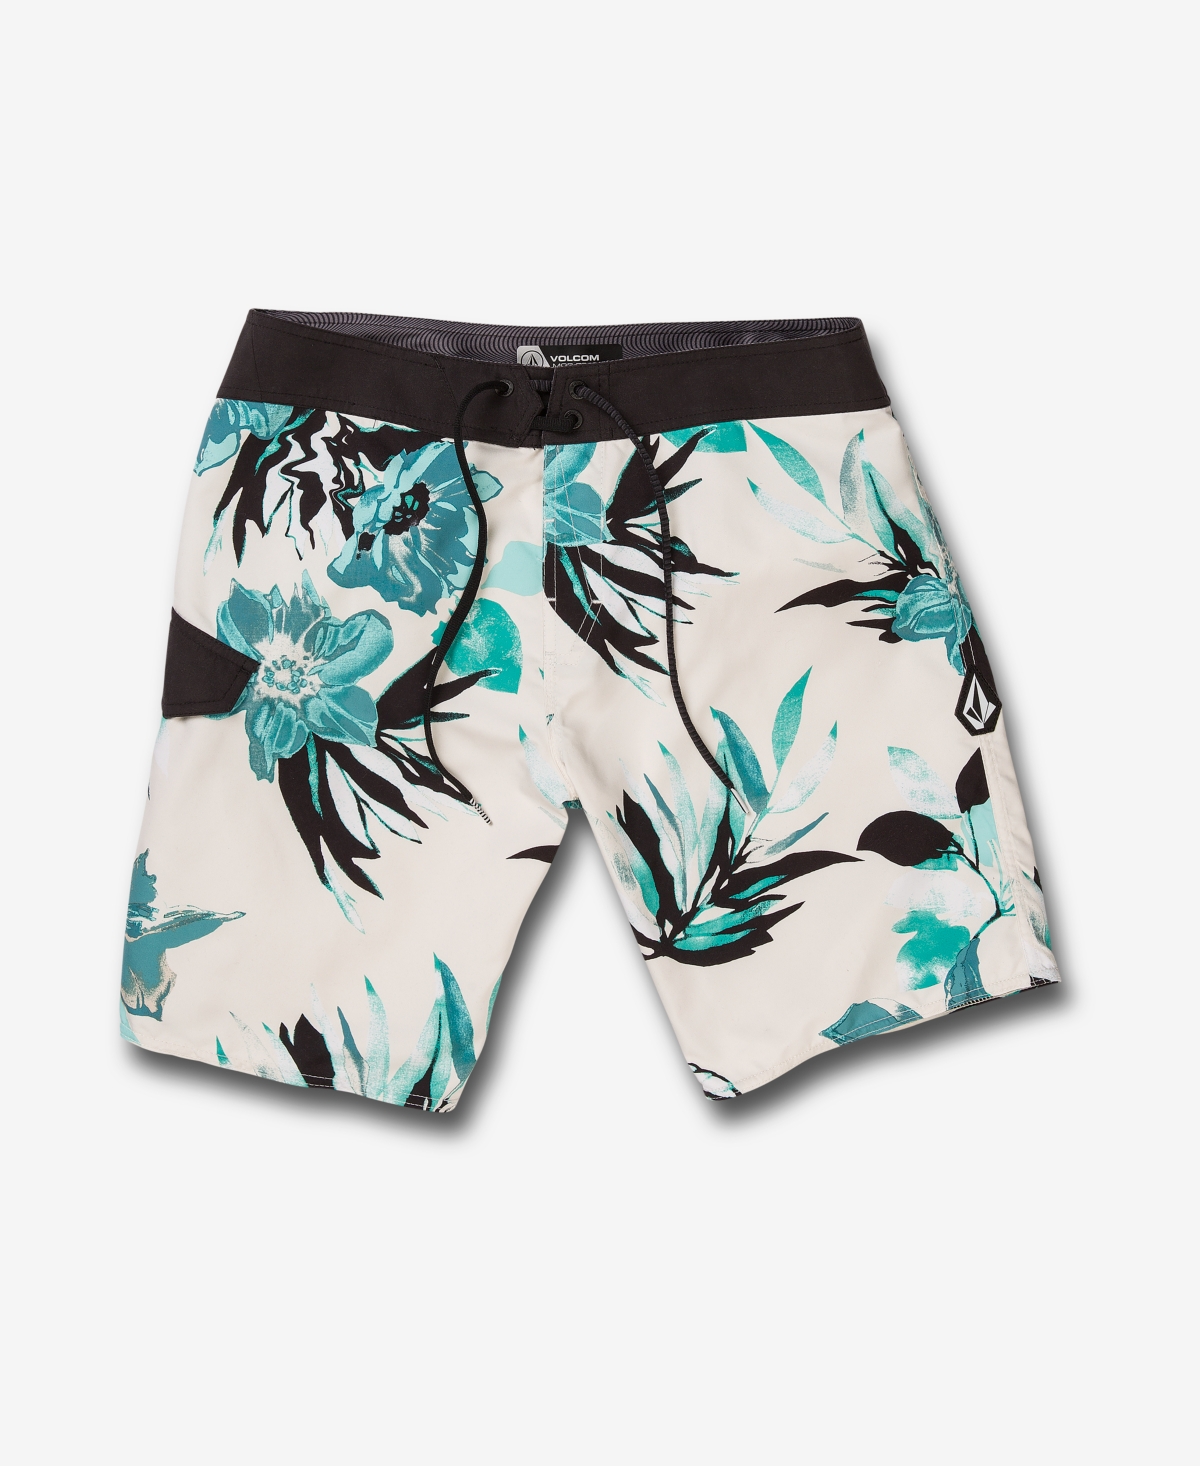 Volcom Mens Mod Marble Floral 19 Boardshorts by Volcom